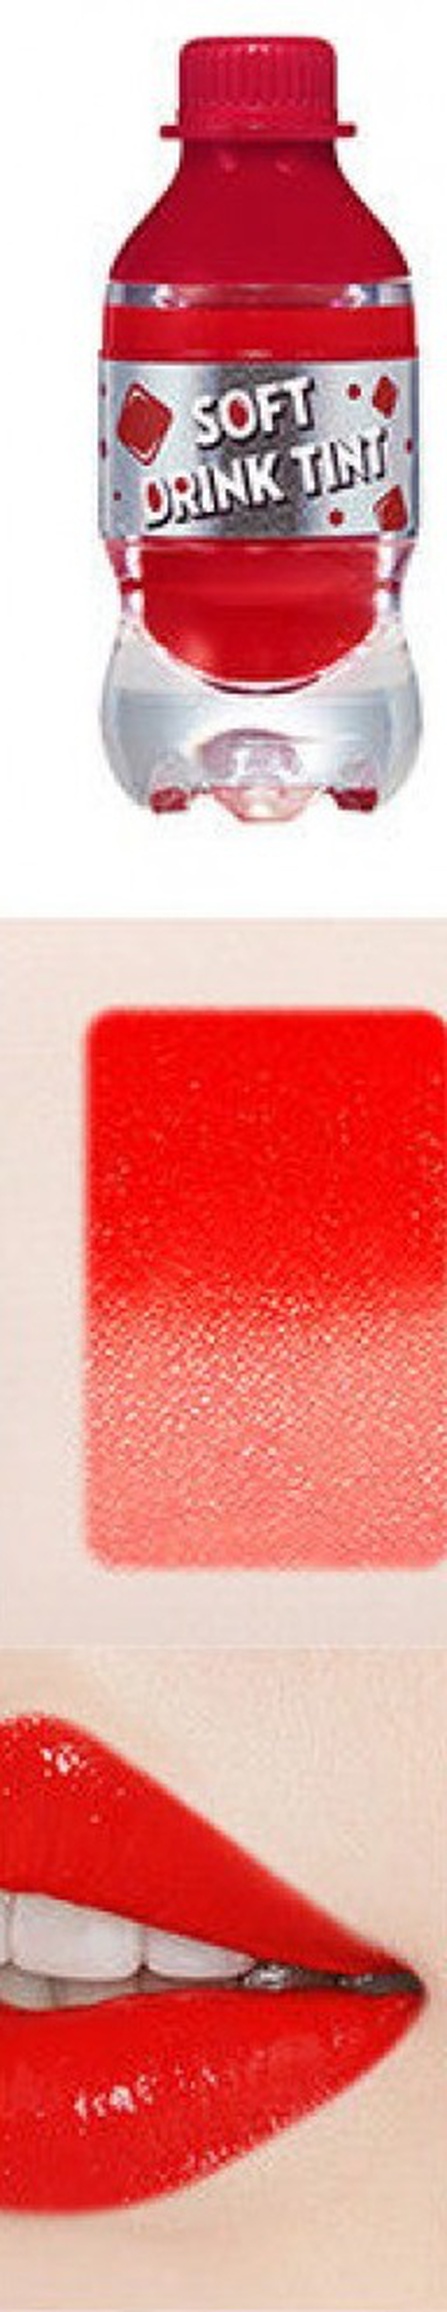 Trushear zero red. [Etude] Soft Drink Tint rd301 Red.